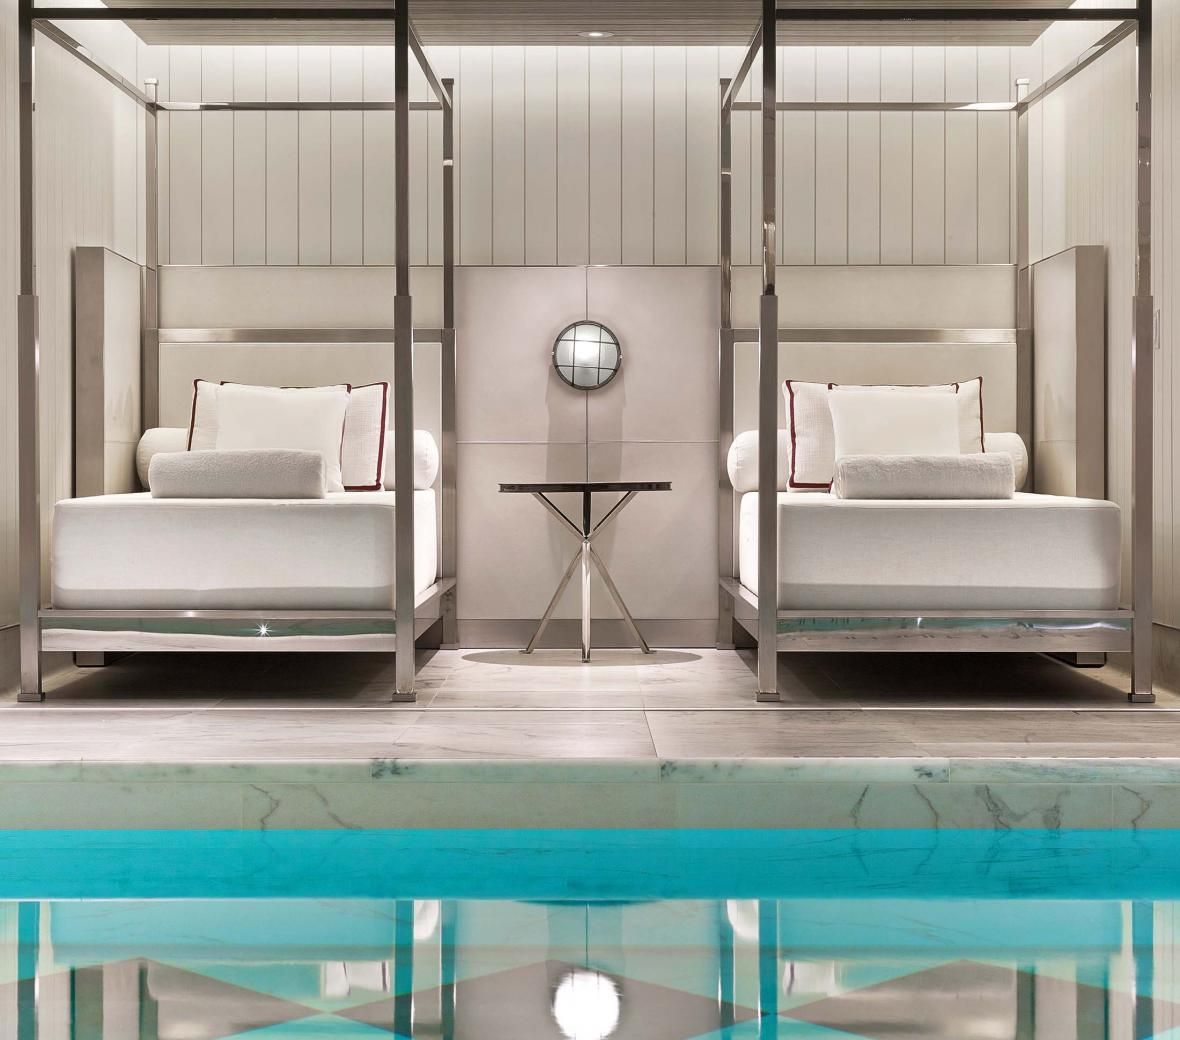 Two day beds by the side of an interior swimming pool